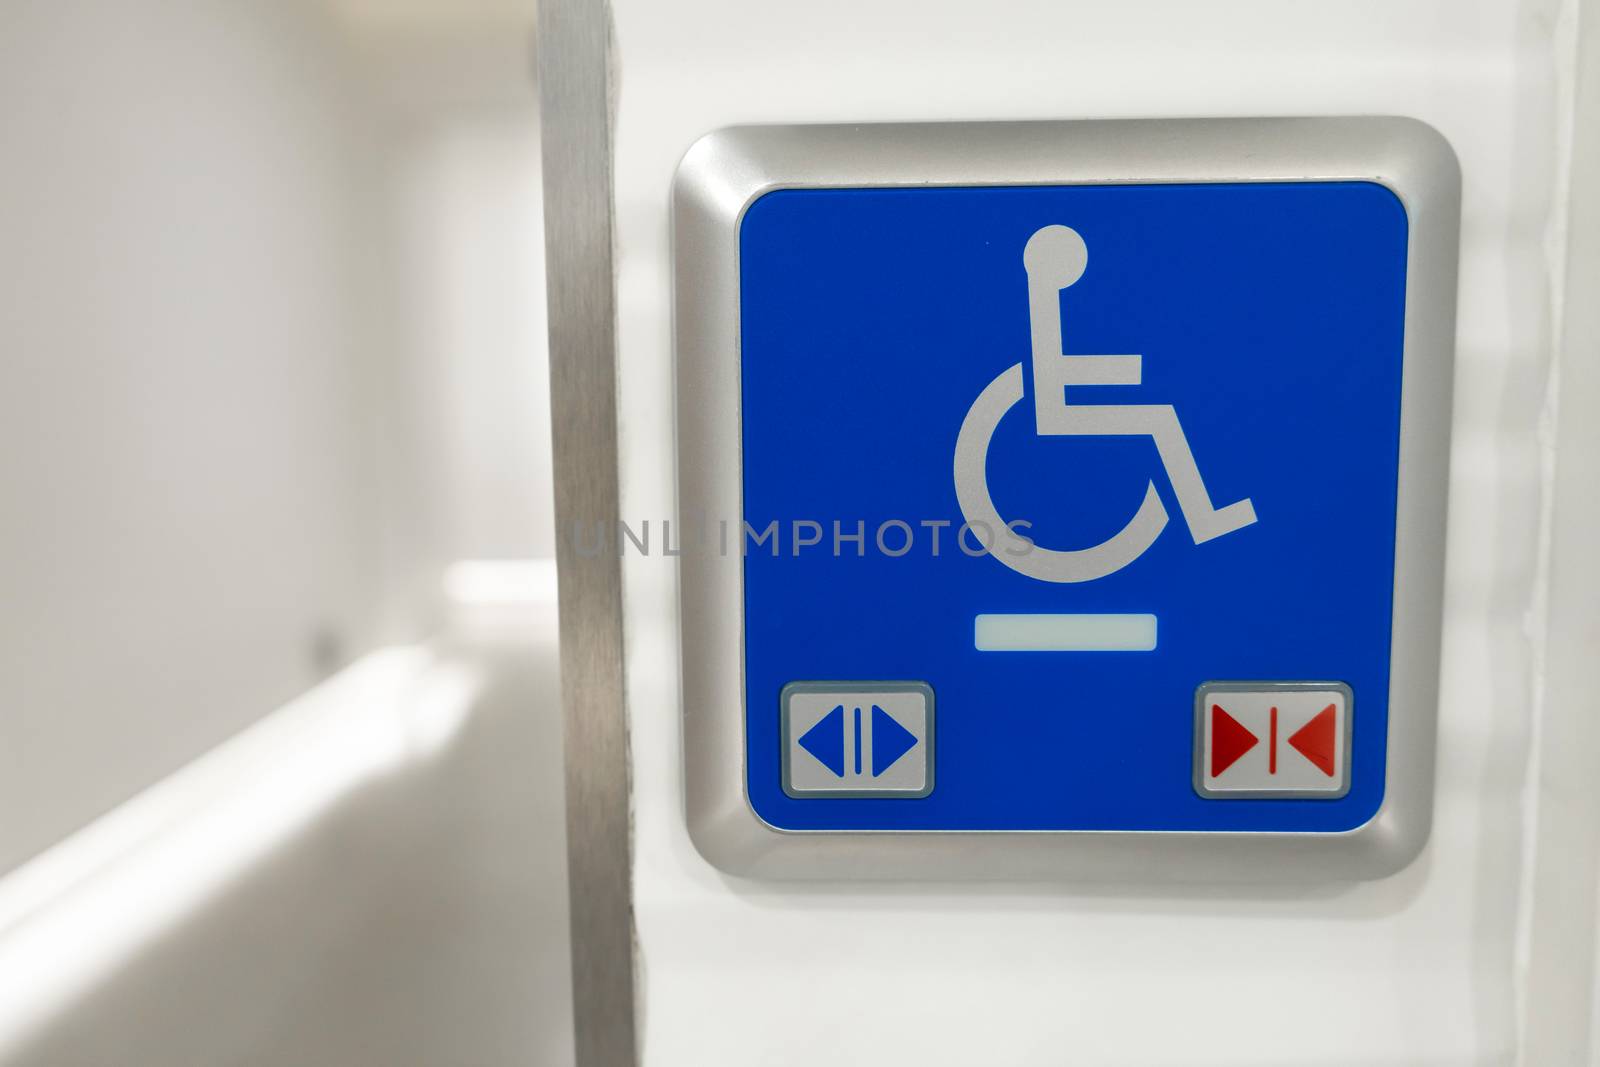 Restroom for people with disabilities in a modern country.